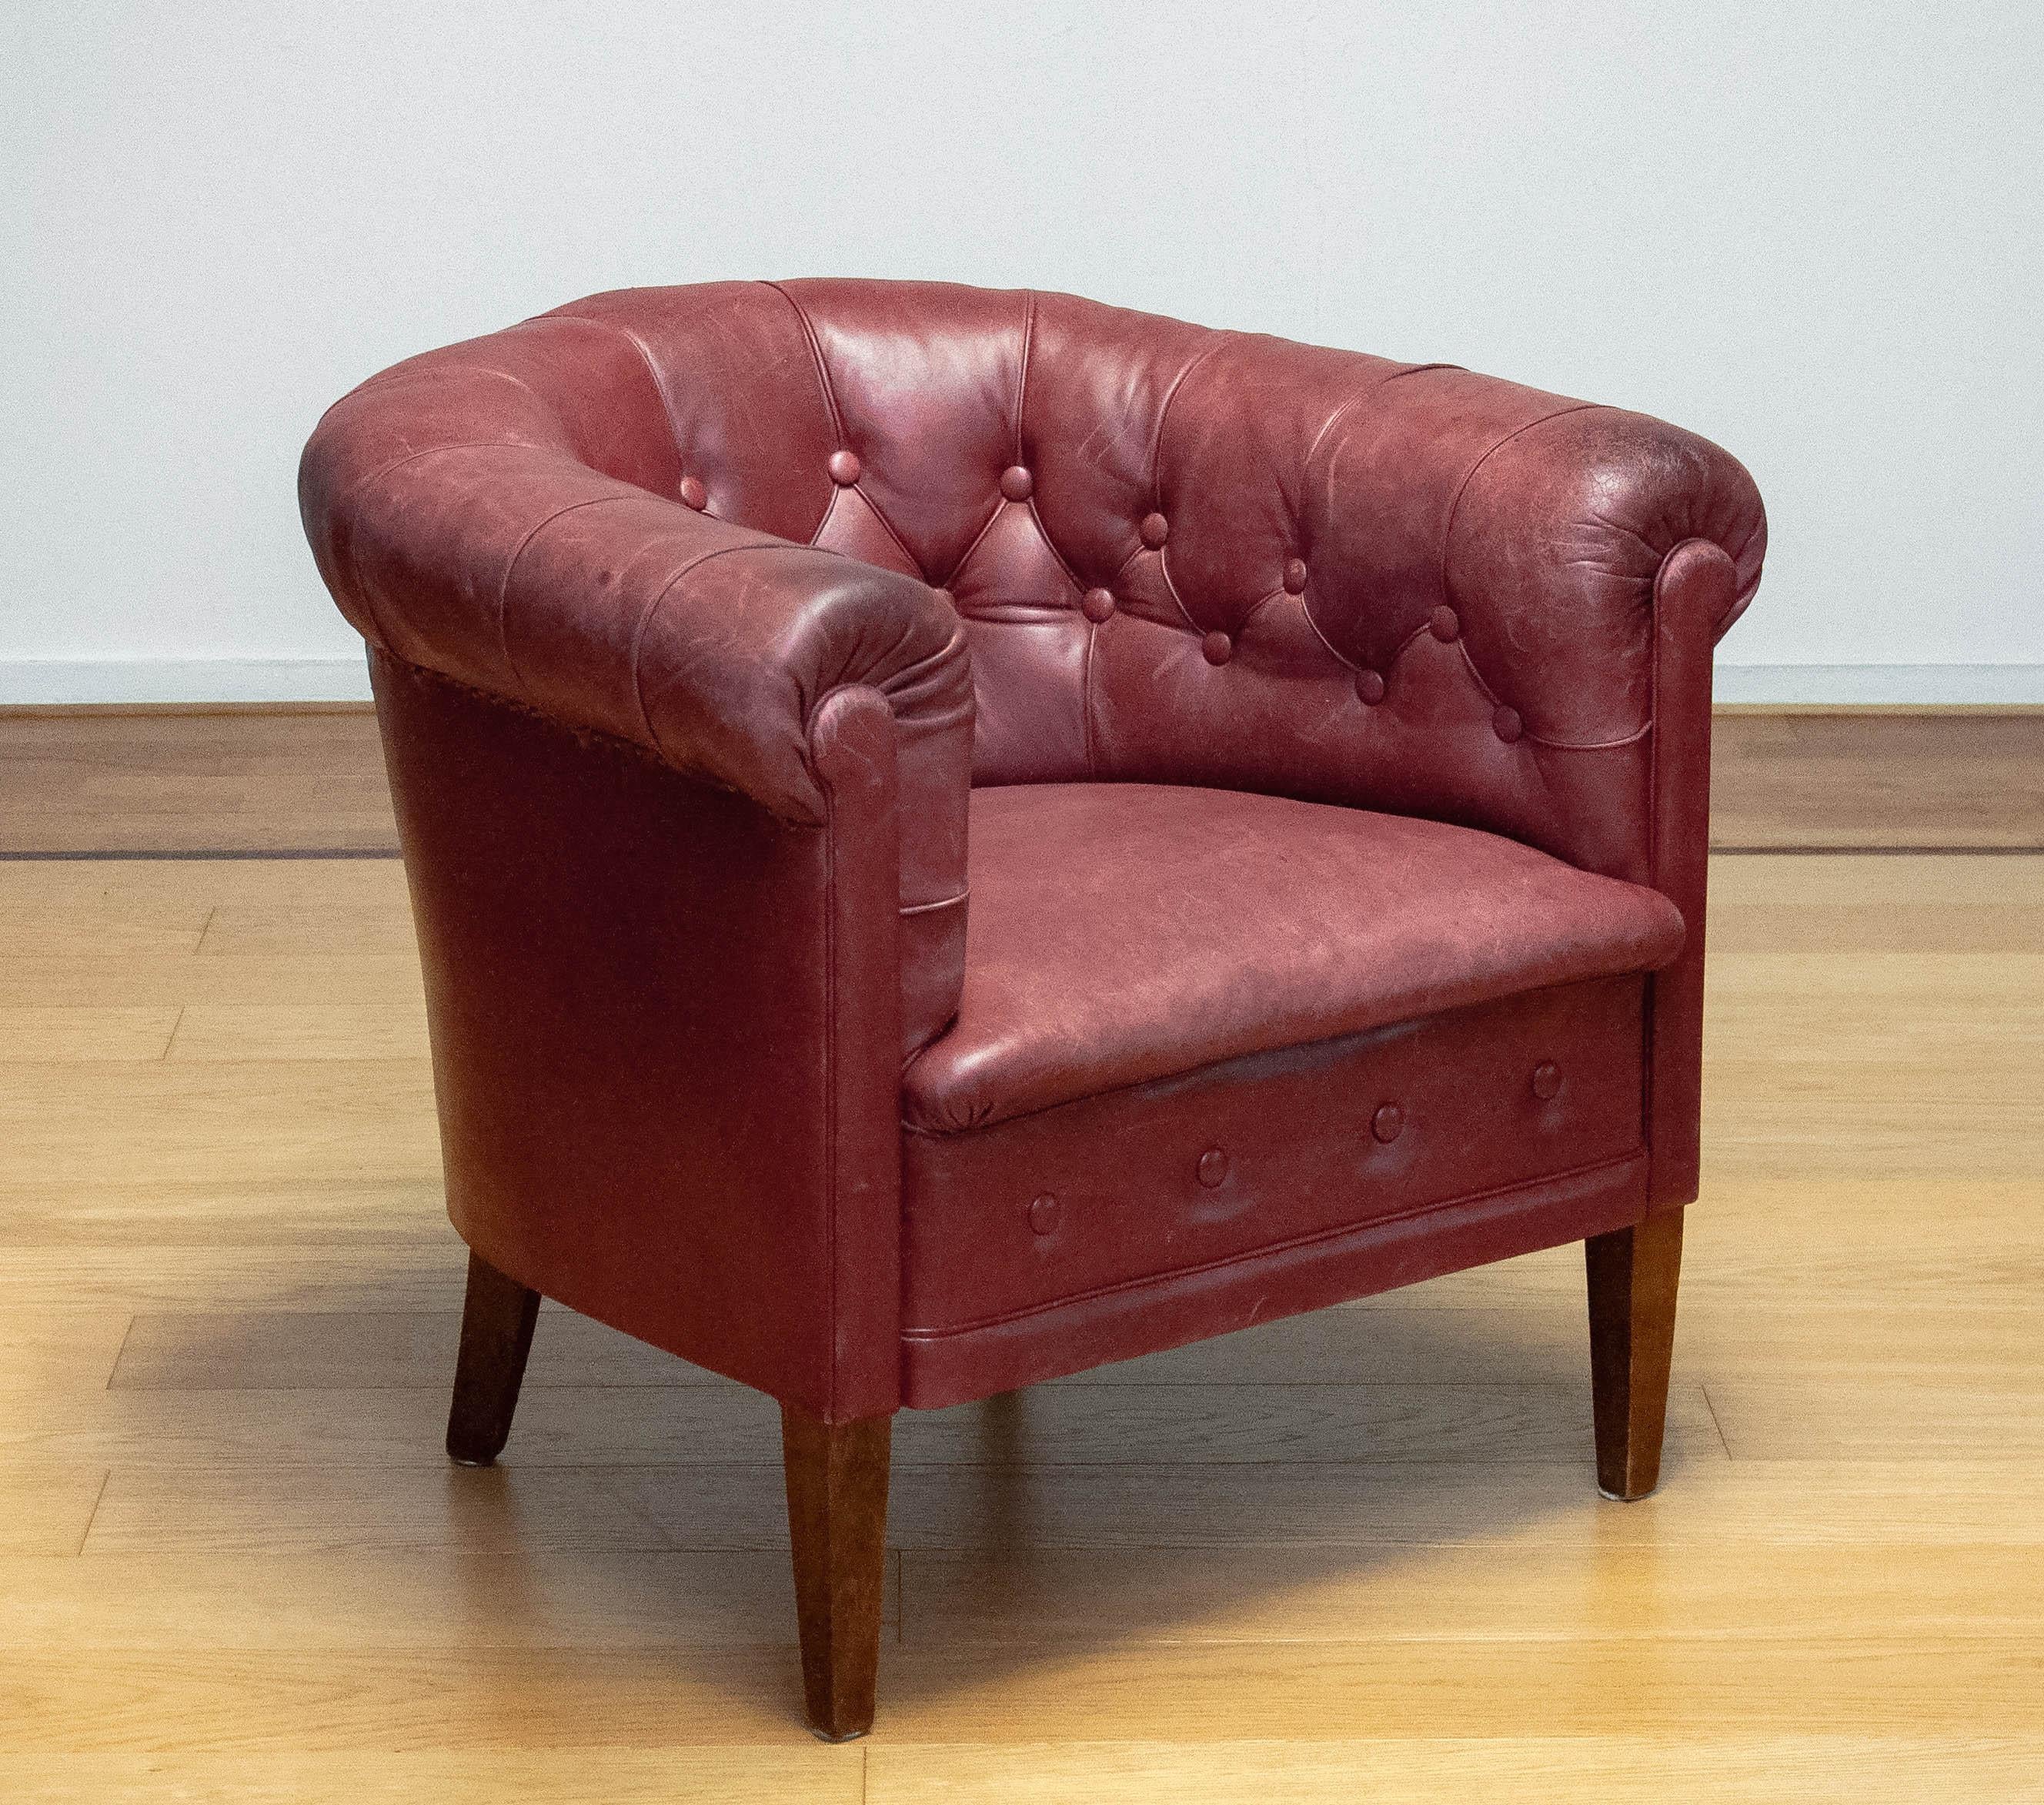 1930s Swedish Crimson Red Chesterfield Club / Lounge Chair in Patinated Leather For Sale 4